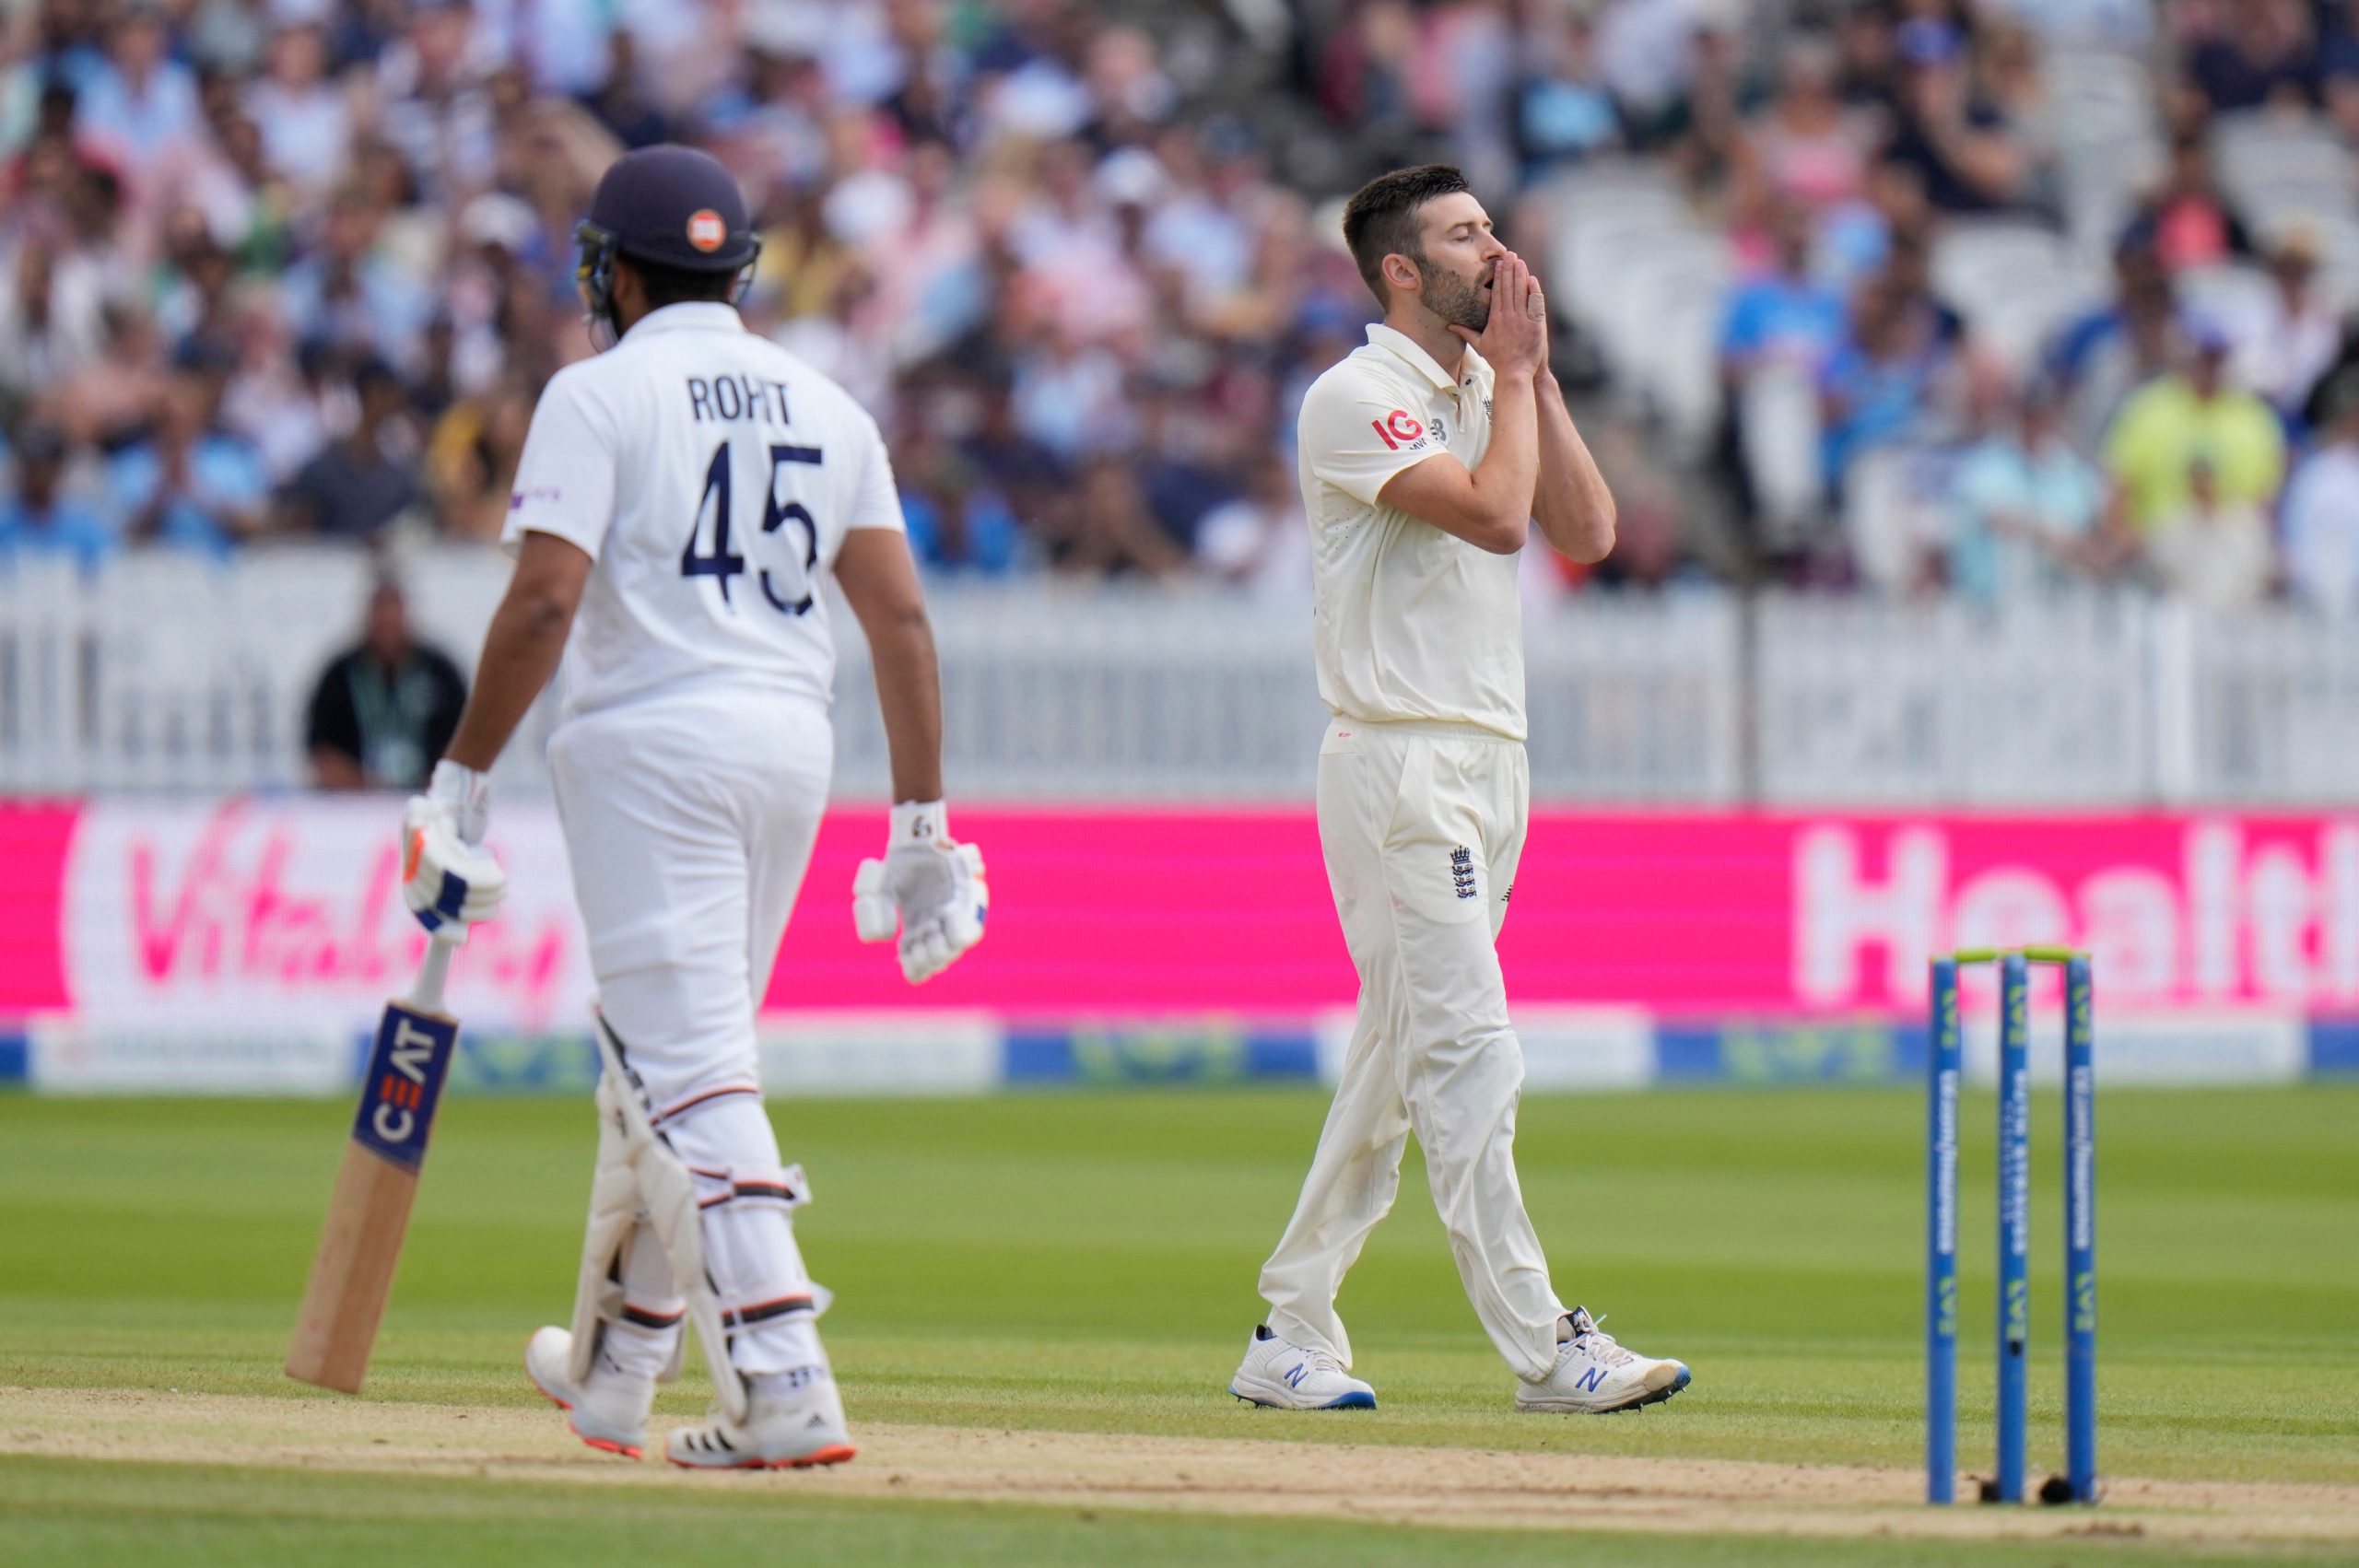 England pacer Mark Wood ruled out of 3rd Test vs India with shoulder injury